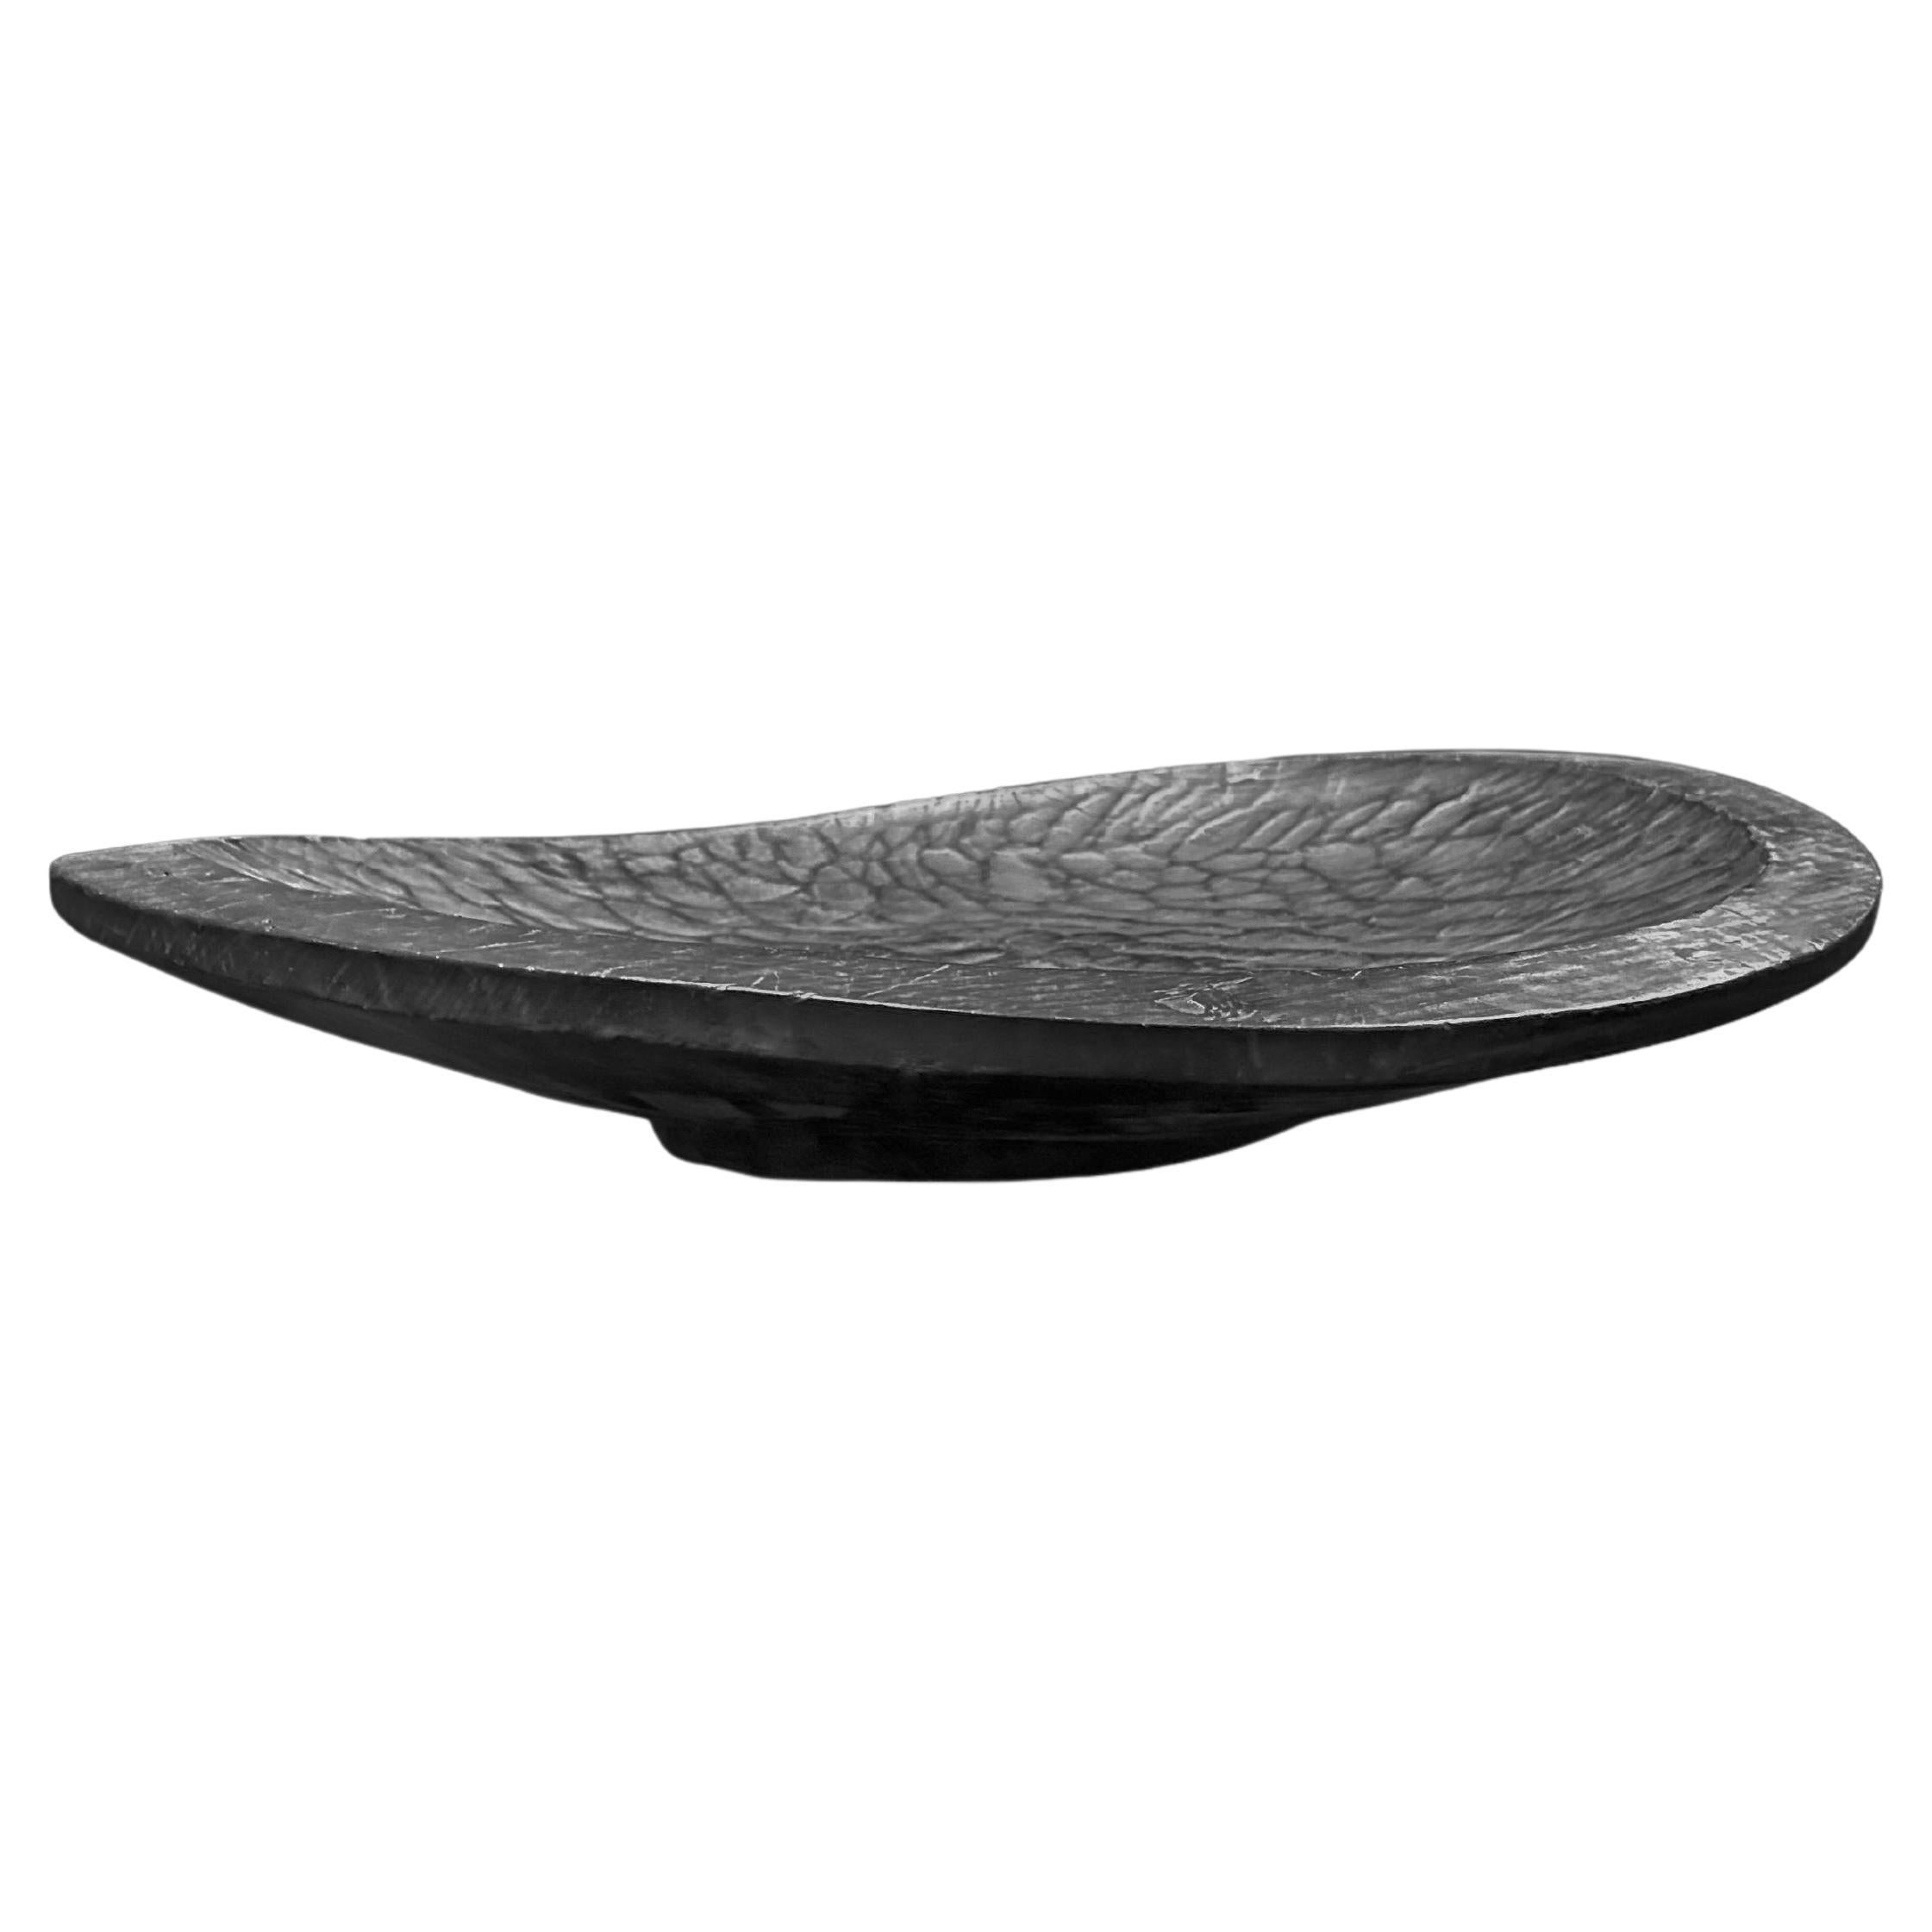 Sculptural Mango Wood Bowl with Hand-Hewn Detailing, Burnt Finish For Sale